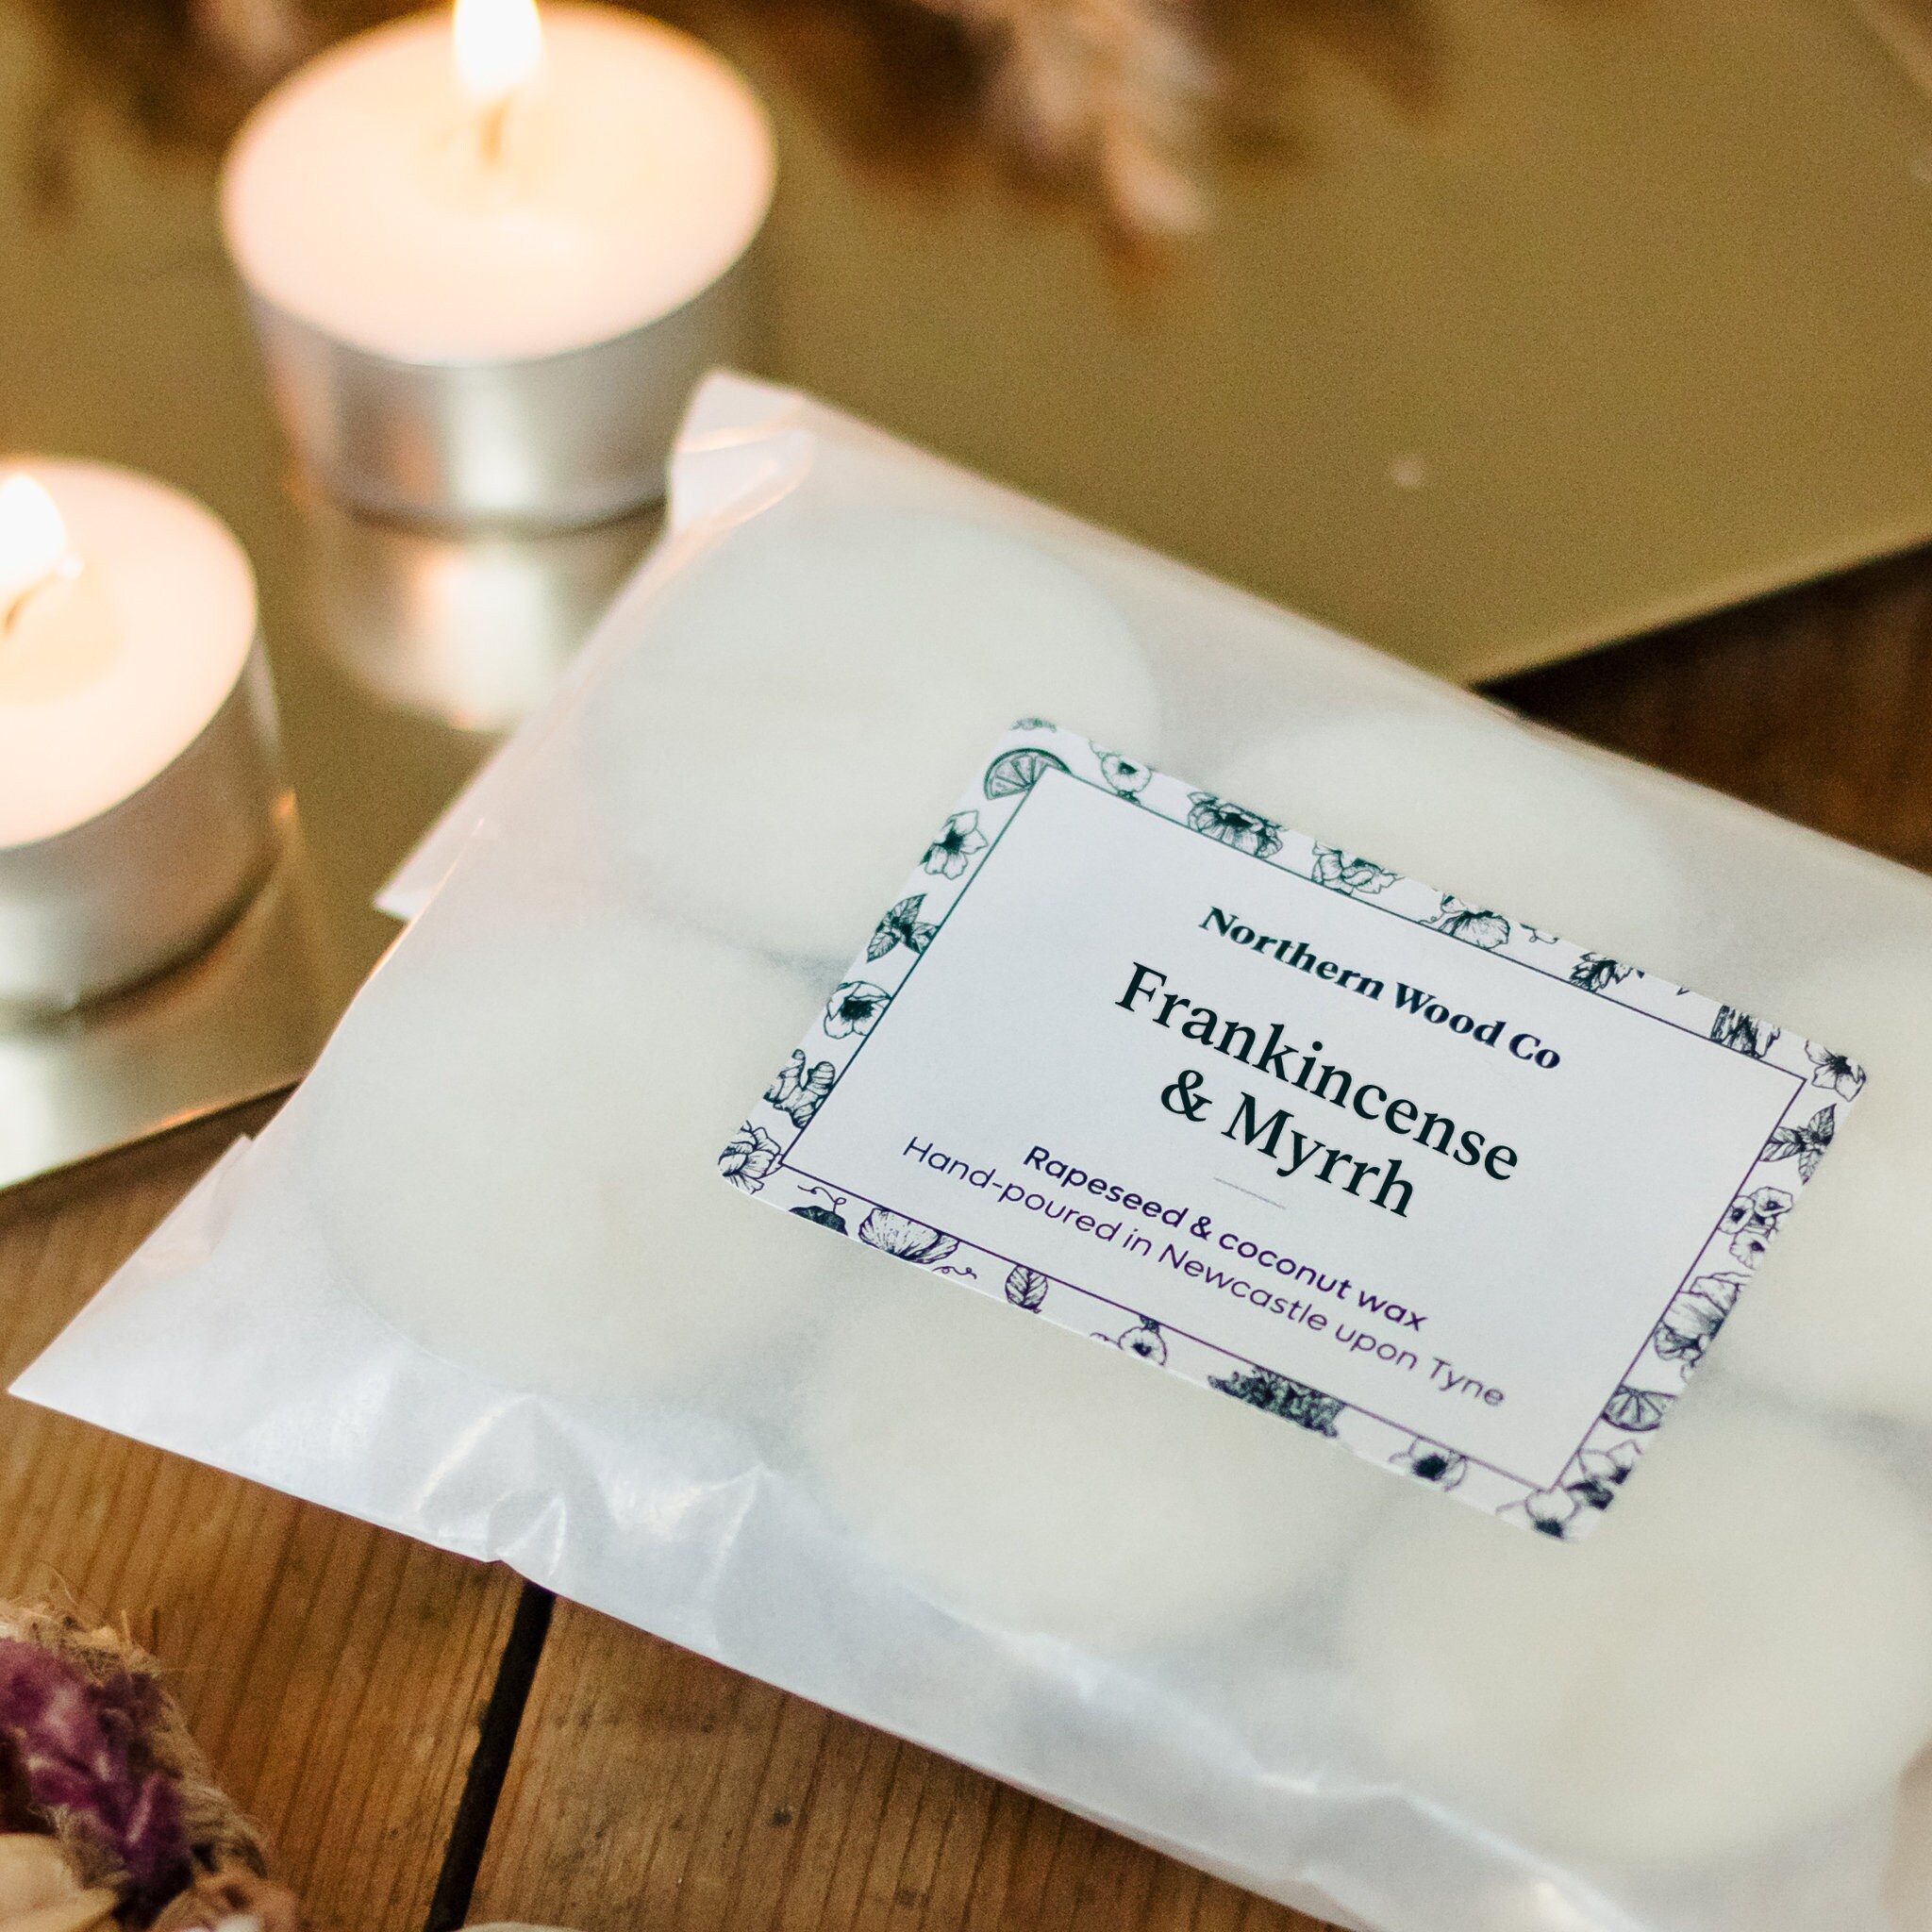 Frankincense & Myrrh Candle / Soy Wax Candle / Festive Candle / Christmas  Home Decor / Gift for Her / Stocking Filler / Gift for Home 